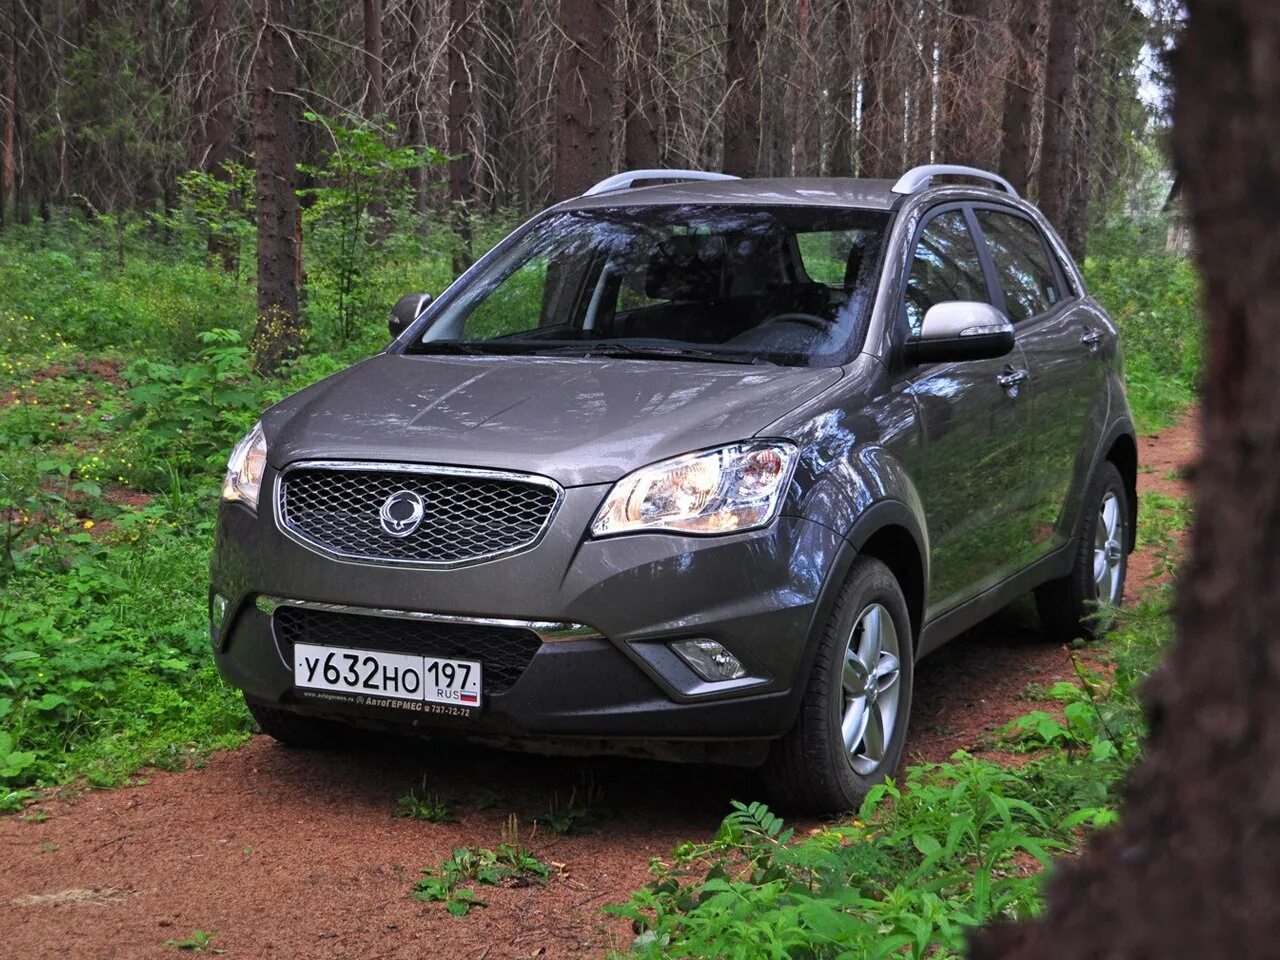 Машина санг йонг. SSANGYONG Actyon. Санг енг Актион 2011. SSANGYONG Actyon II. SSANGYONG New Actyon.